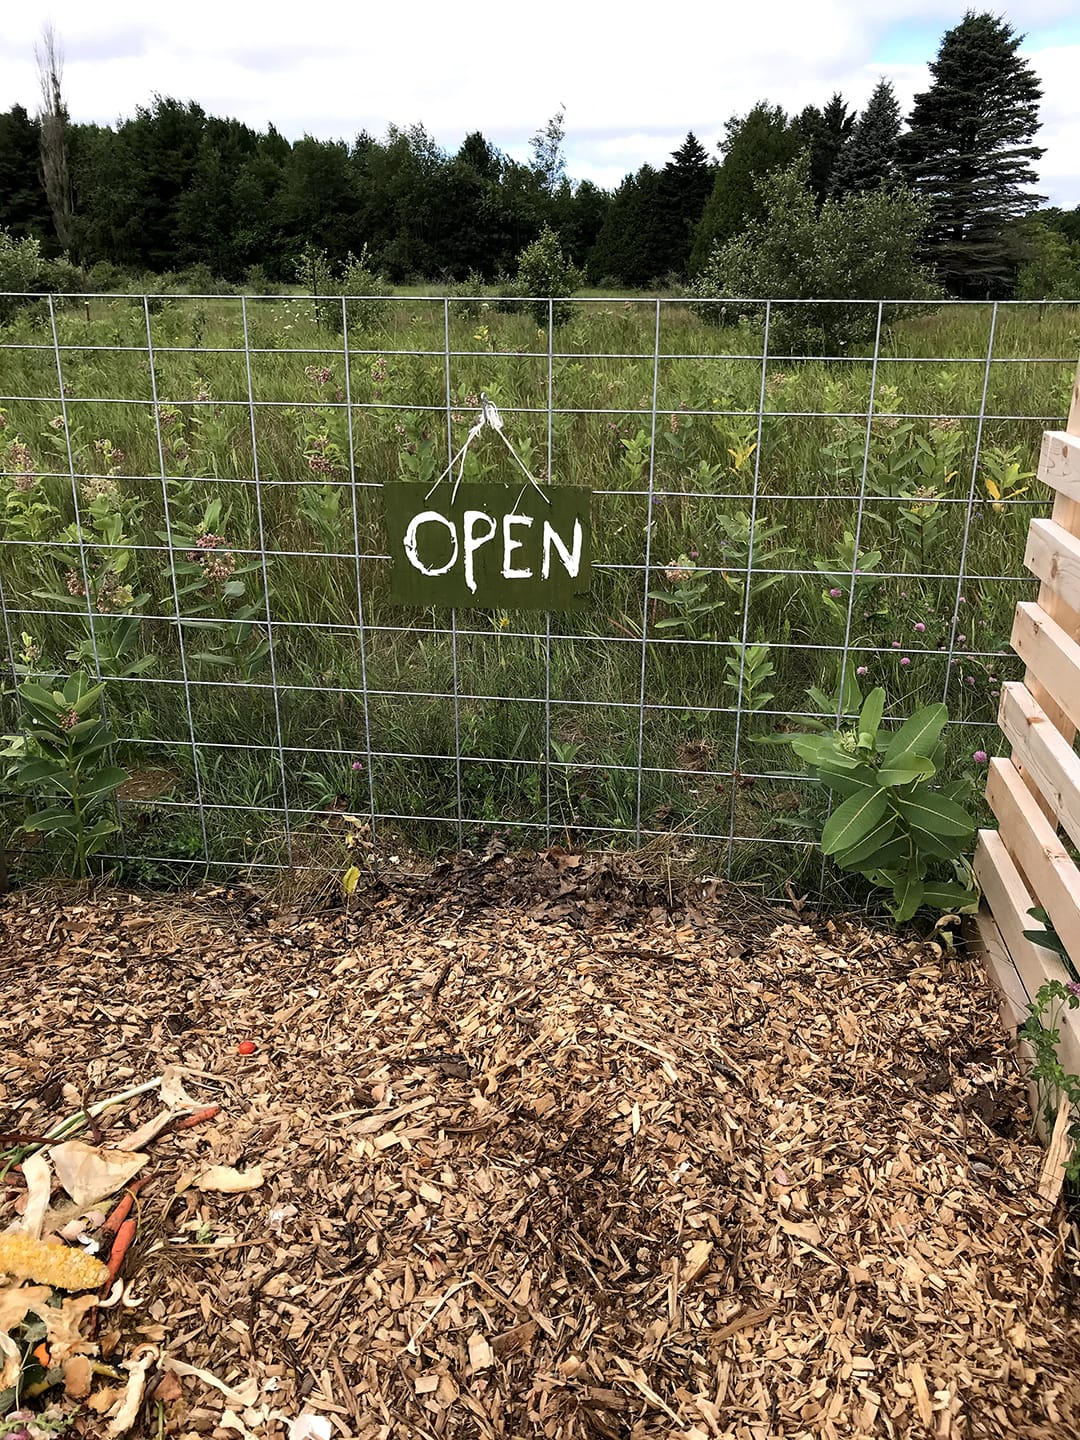 A compost pile is pictured in the foreground, with a sign reading "open" hanging from a fence, and an open field in the background.